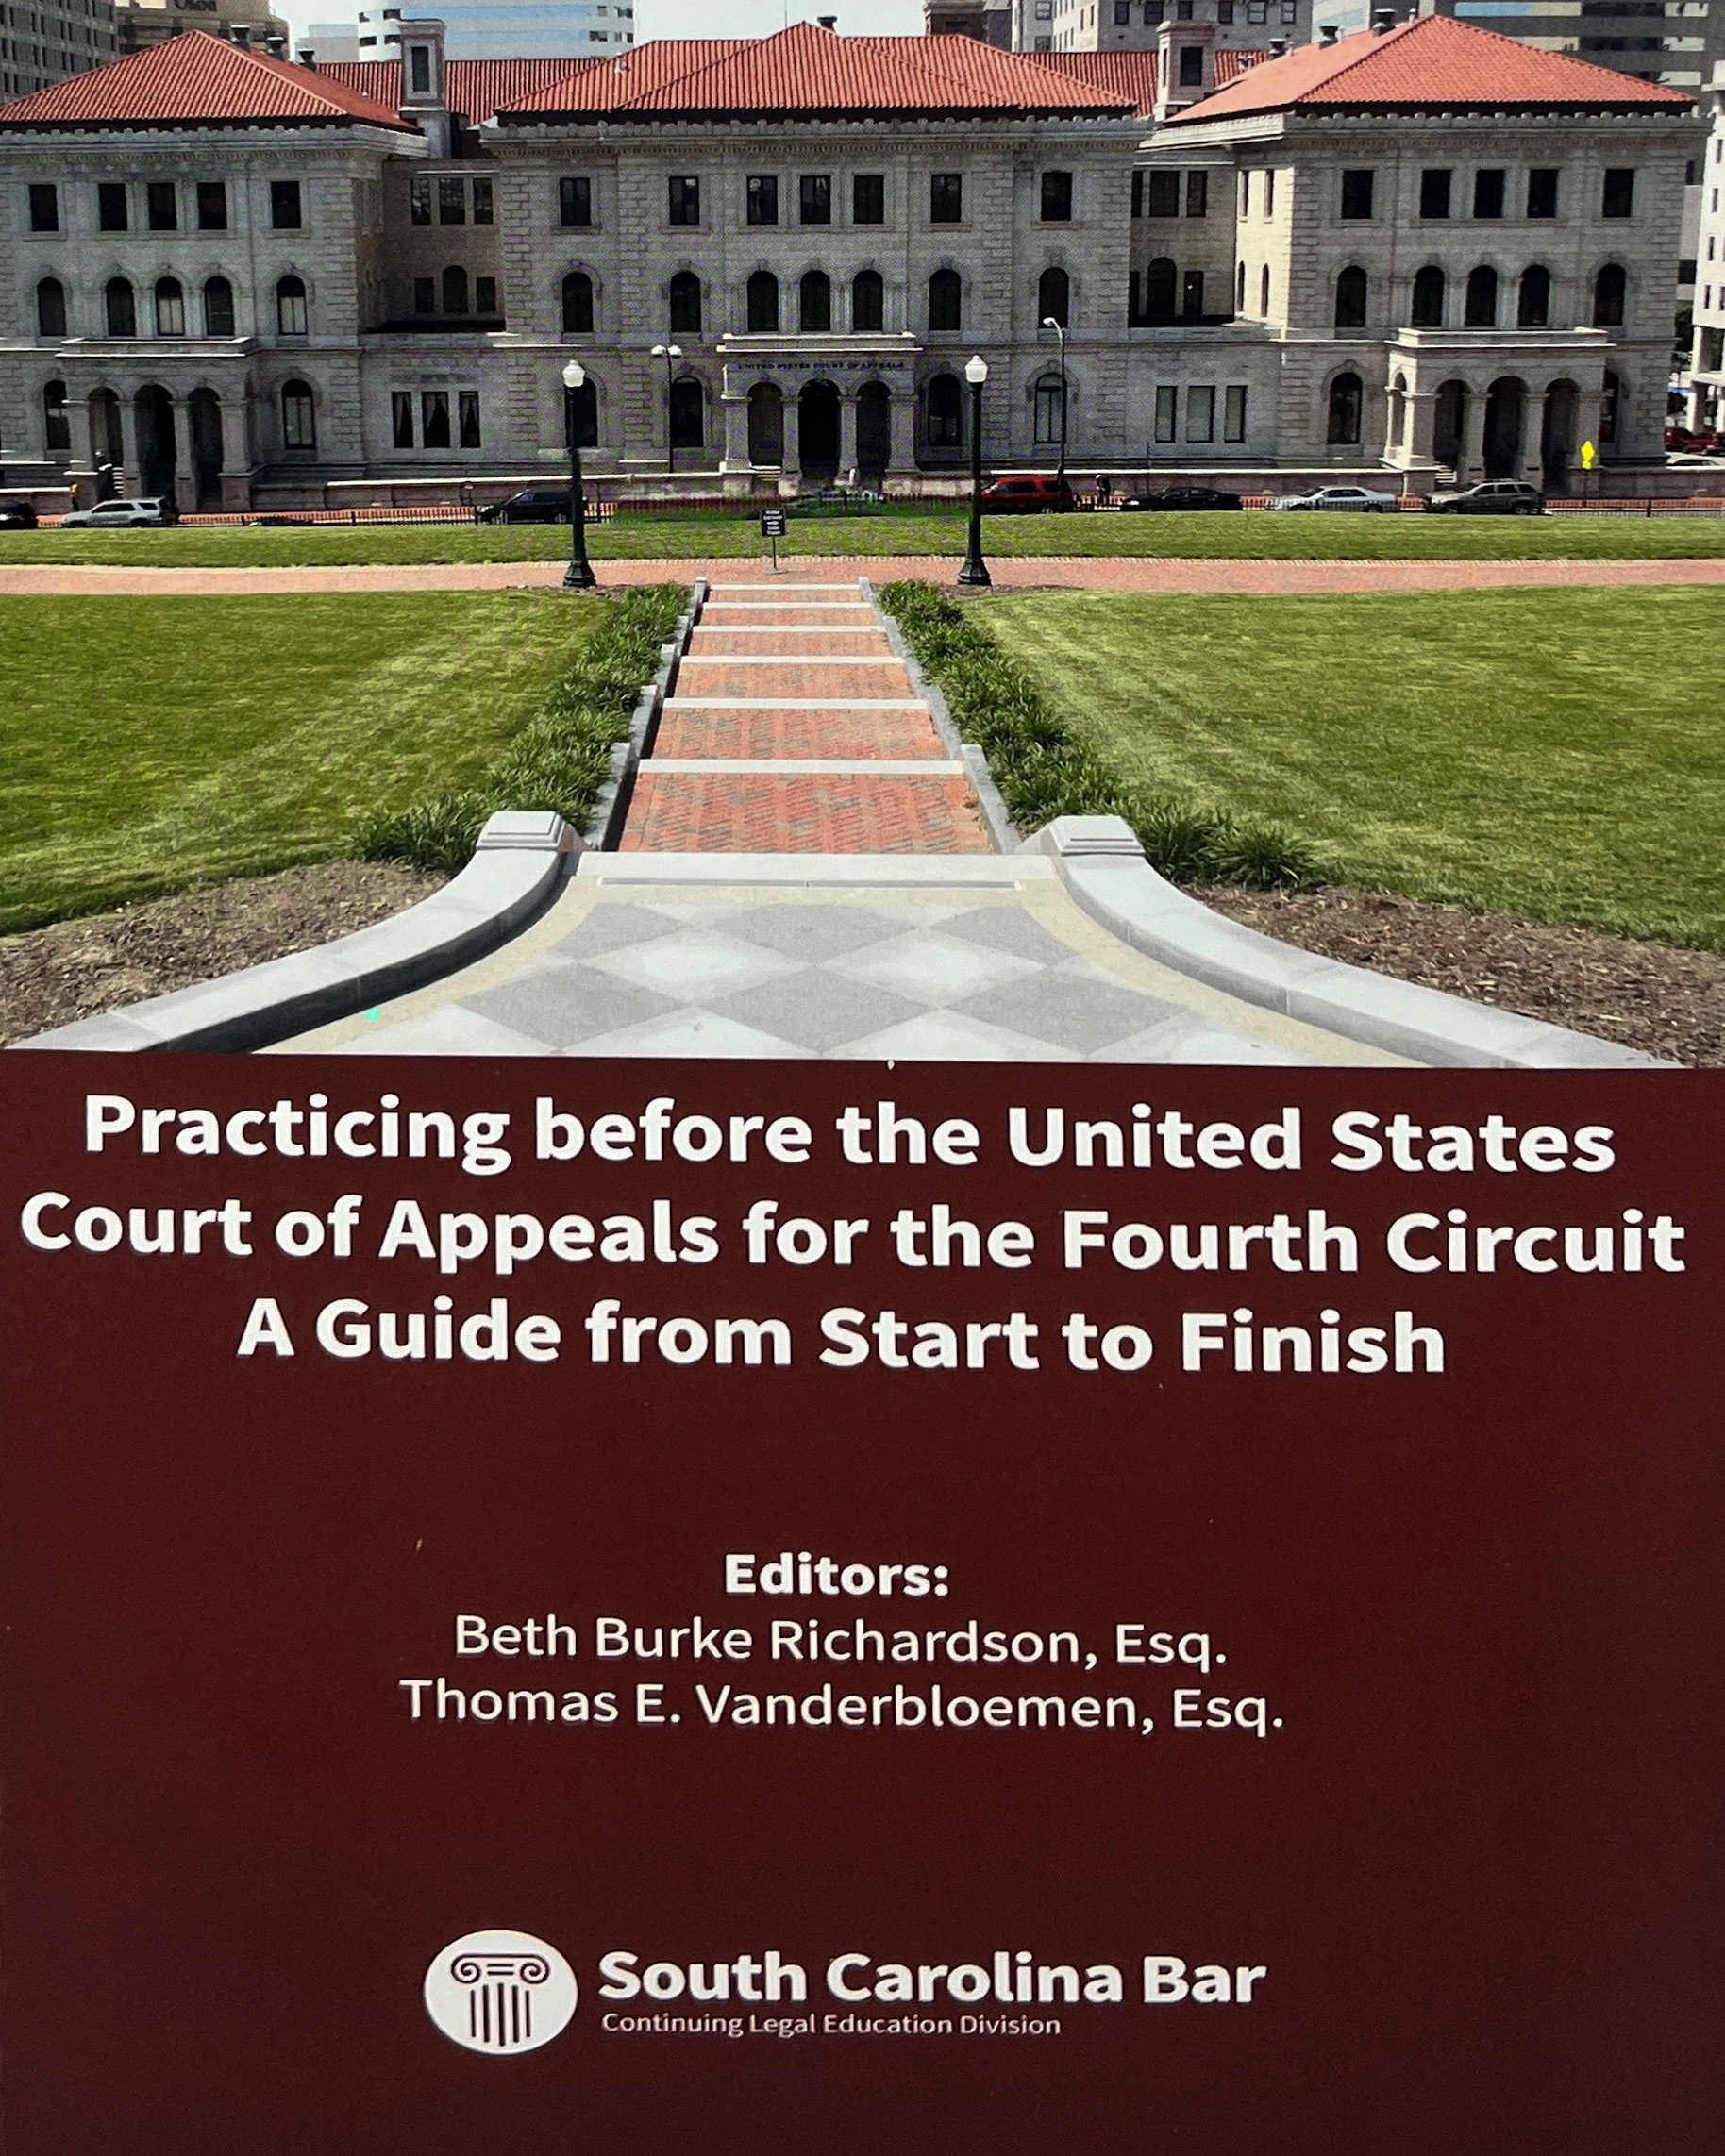 Practicing before the United States Court of Appeals for the Fourth Circuit: A Guide from Start to Finish (2021)